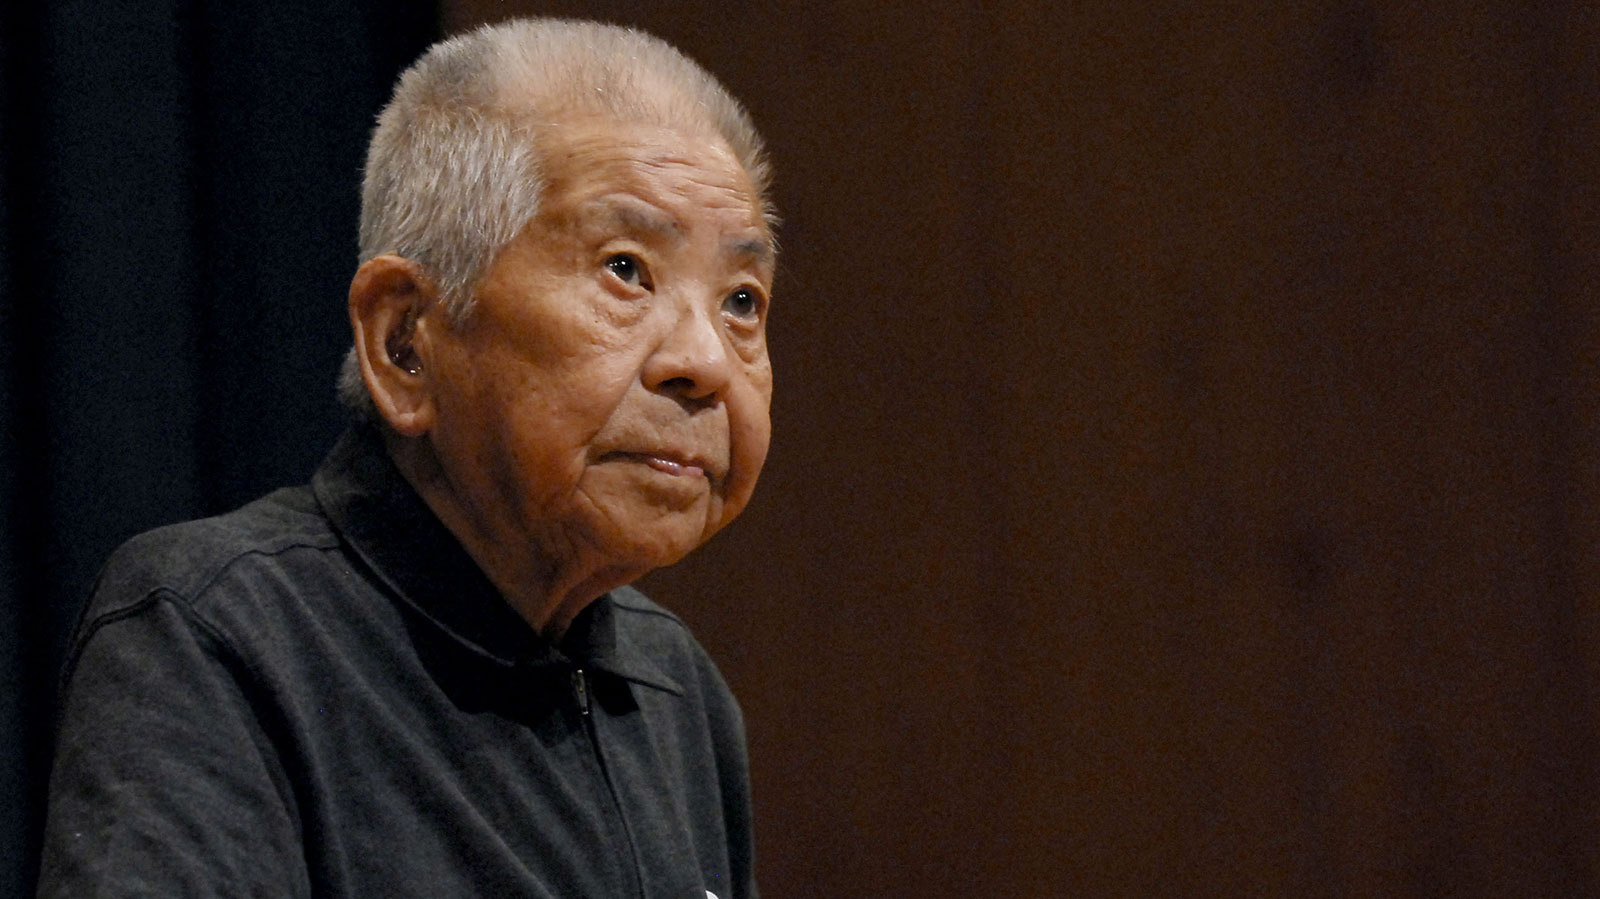 In 1945, Tsutomu Yamaguchi survived the atomic blast at Hiroshima, dragged himself to an air-raid shelter, spent the night, caught the morning train so he could arrive at his job on time  in Nagasaki  where he survived another atomic blast.